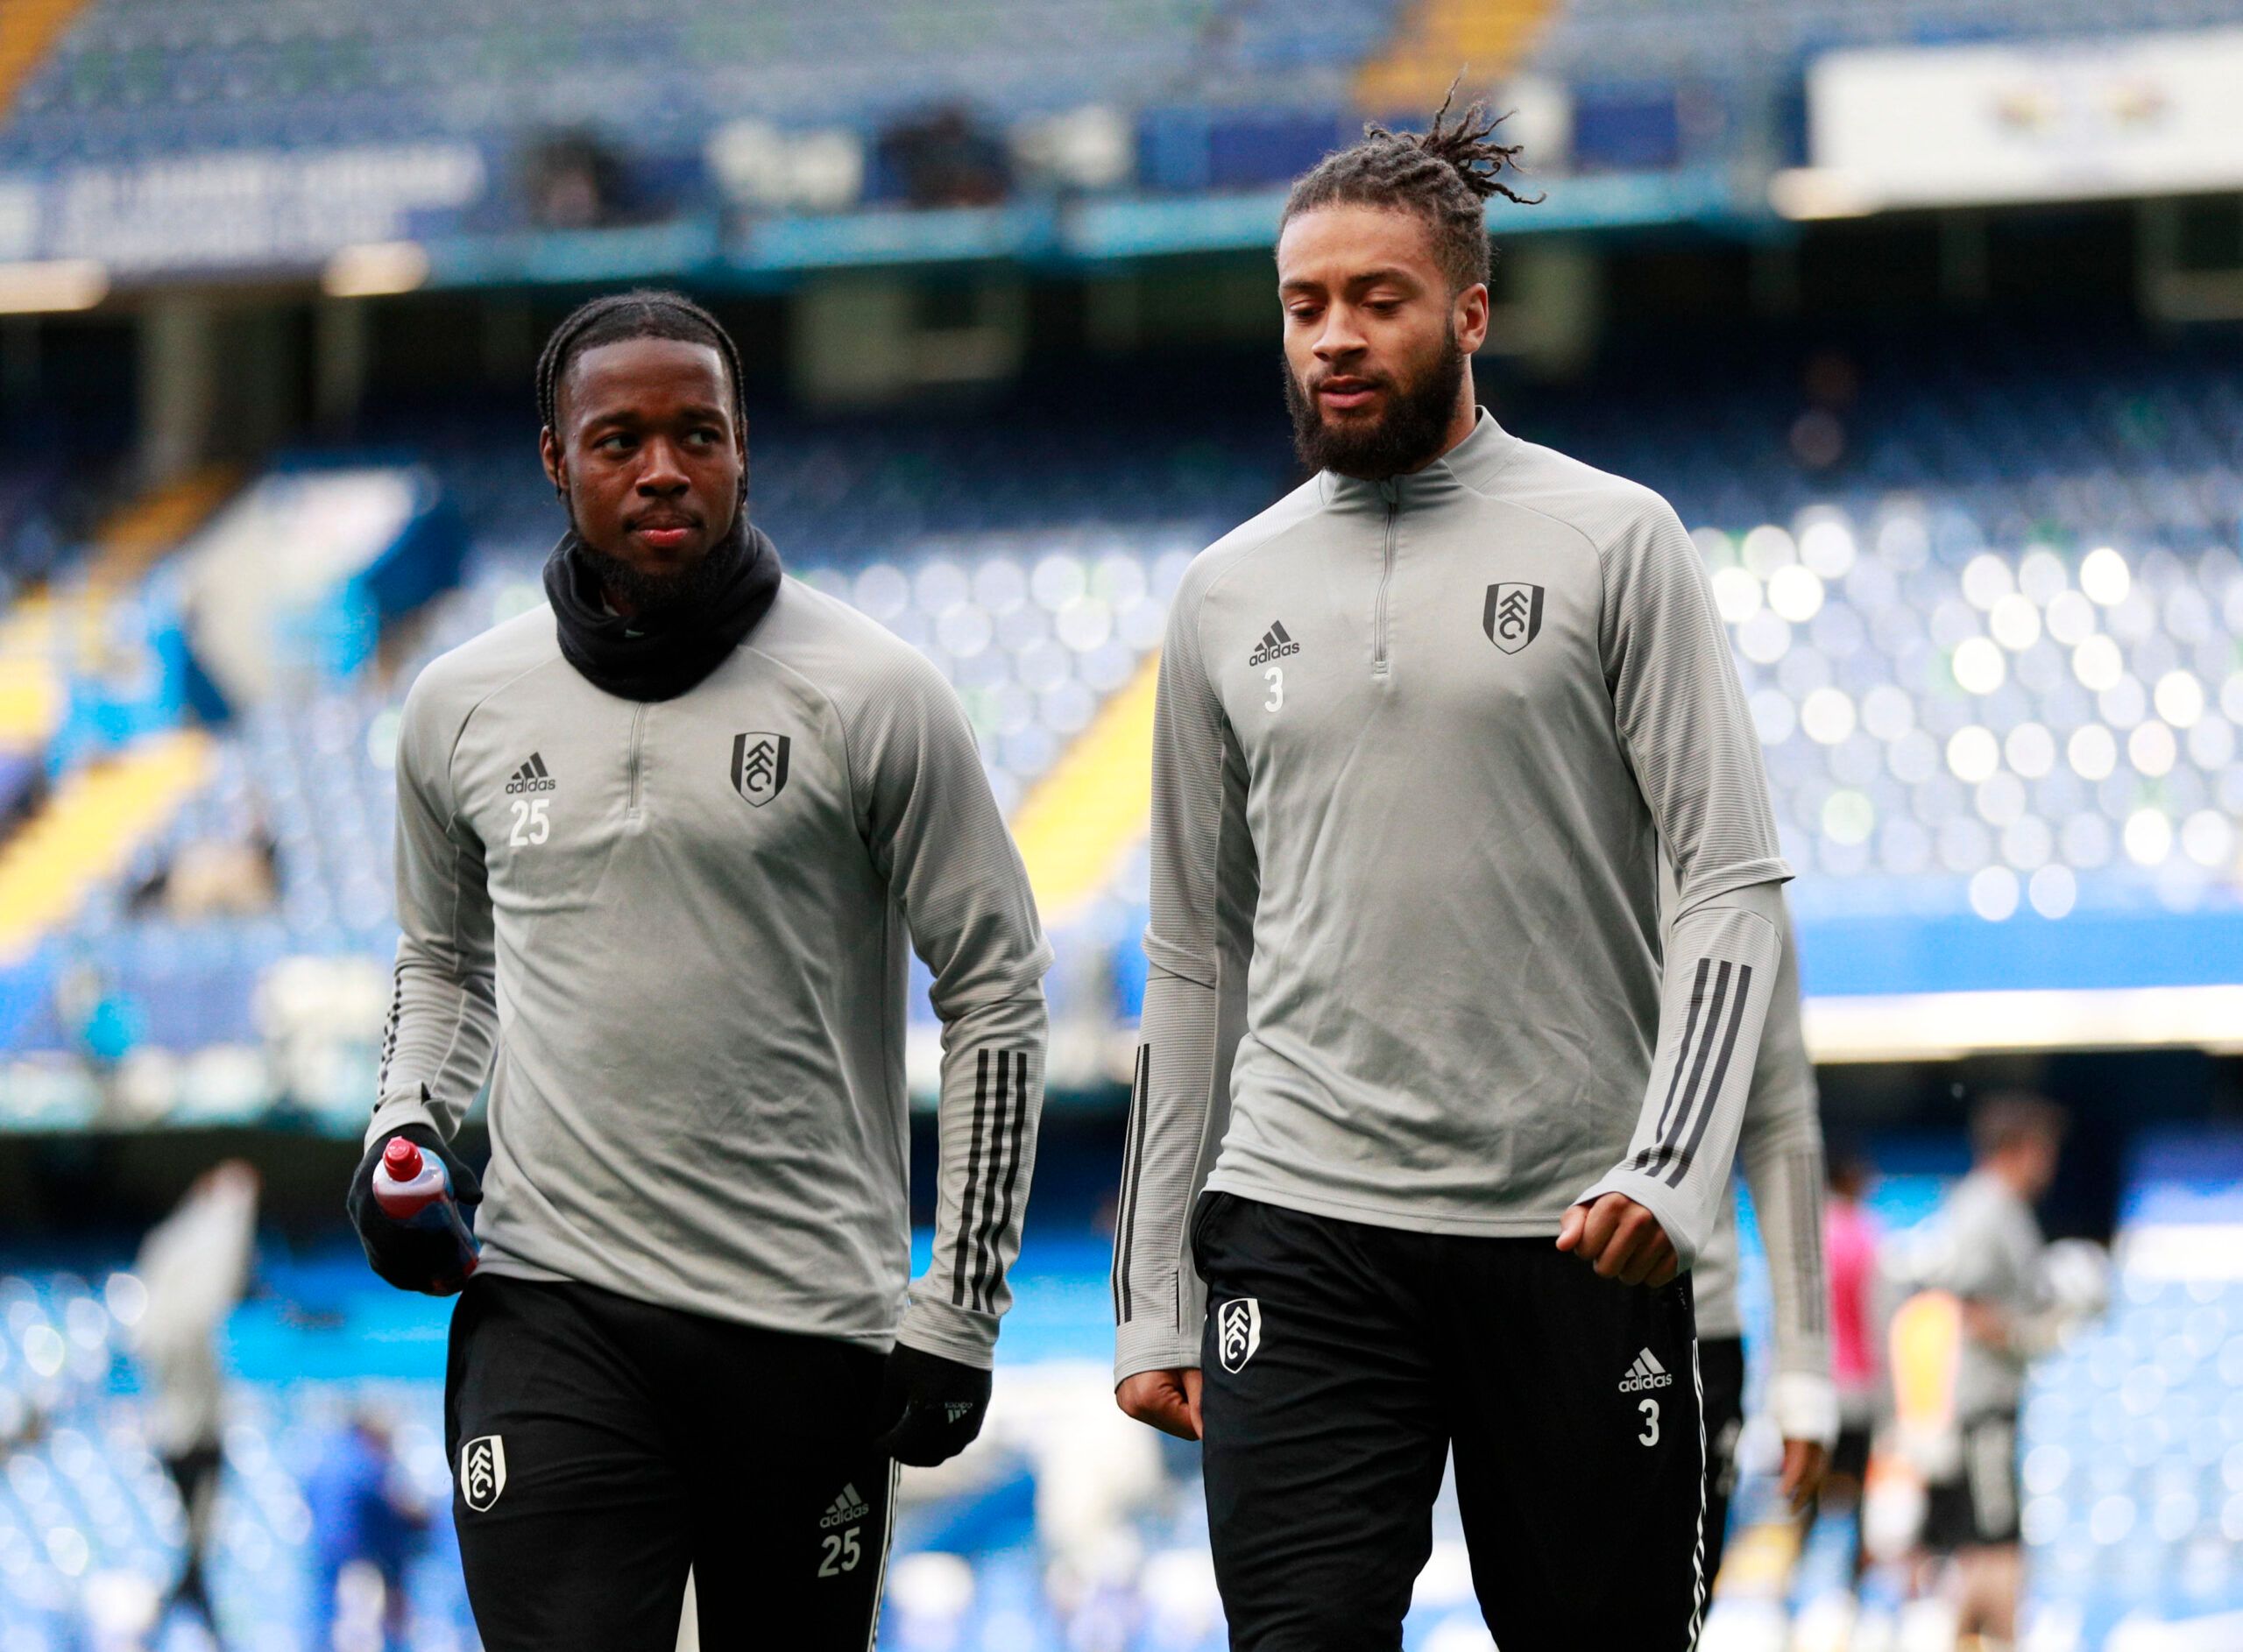 Soccer Football - Premier League - Chelsea v Fulham - Stamford Bridge, London, Britain - May 1, 2021 Fulham's Josh Onomah and Michael Hector during the warm up before the match Pool via REUTERS/Ian Walton EDITORIAL USE ONLY. No use with unauthorized audio, video, data, fixture lists, club/league logos or 'live' services. Online in-match use limited to 75 images, no video emulation. No use in betting, games or single club /league/player publications.  Please contact your account representative fo